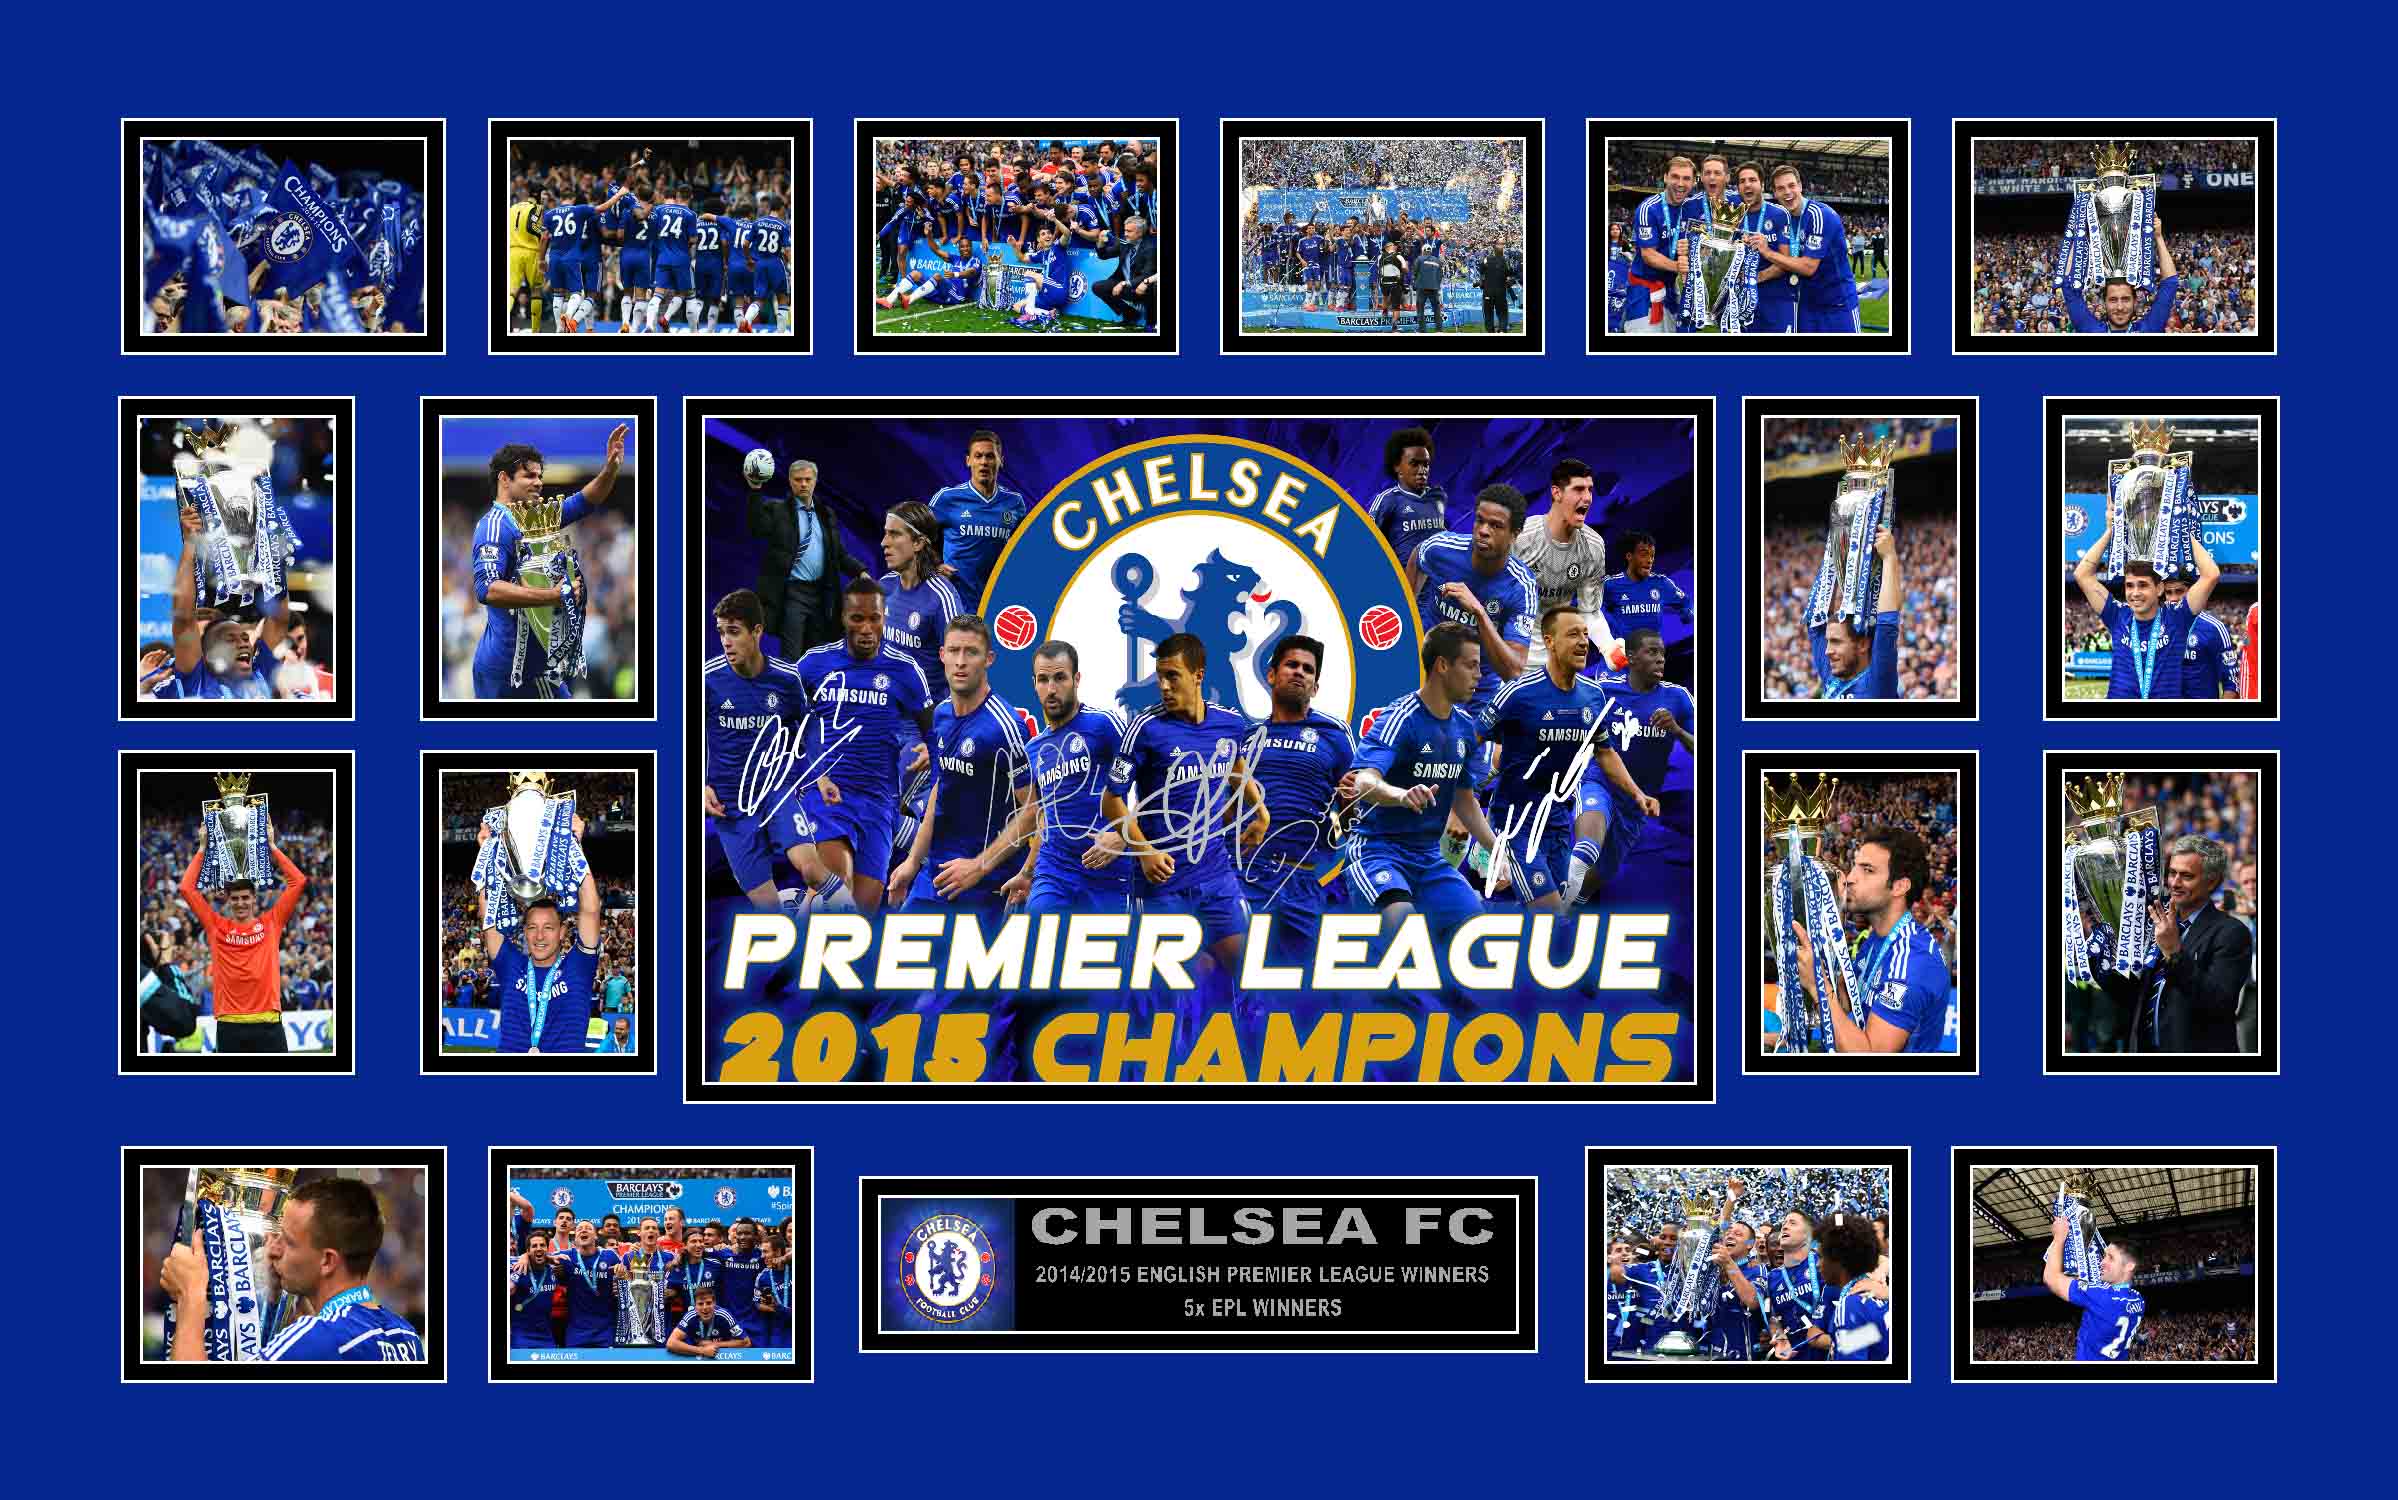 Chelsea 2014/2015 English Premier League Winners Collage Framed - KING CAVE